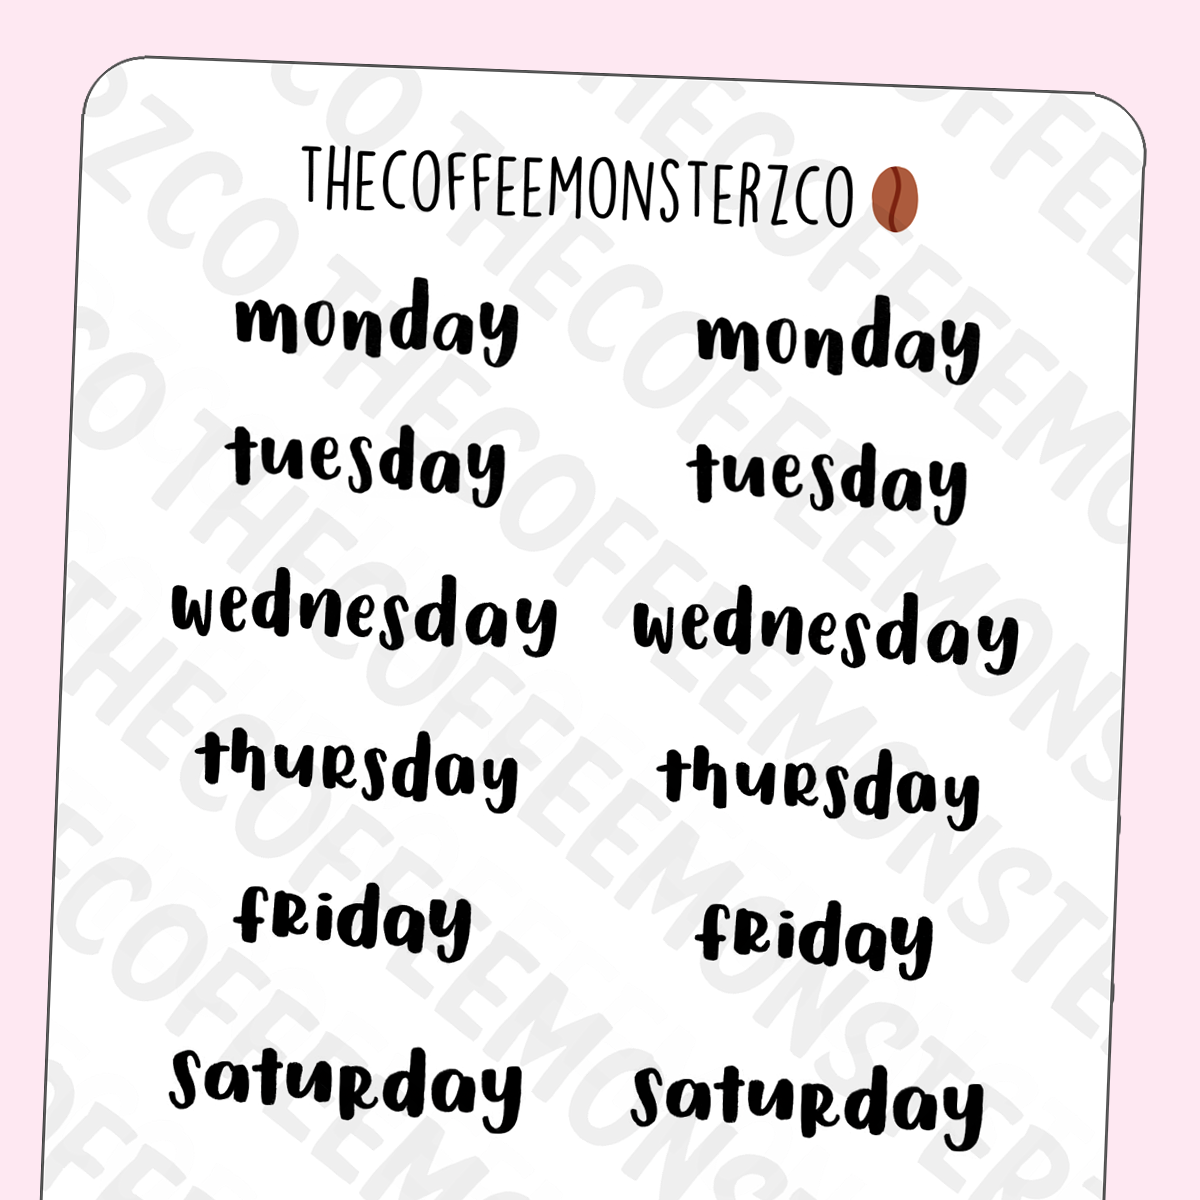 Lettering in Spanish, Days of the Week - Monday, Tuesday, Wednesday,  Thursday, Friday, Saturday, Sunday. Handwritten Words for Stock  Illustration - Illustration of latino, brush: 198598943